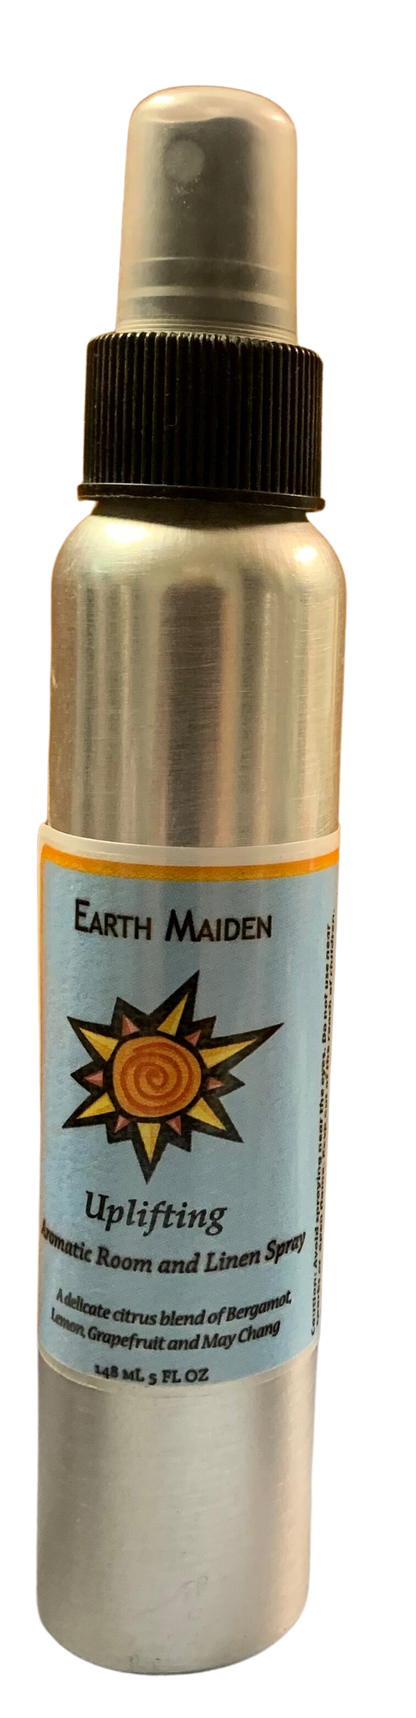 All Natural “Uplifting” Aroma Mist with Bergamot, Lemon, Grapefruit and May Chang Essential Oils in 5 ounce metal bullet container with fine mist sprayer.